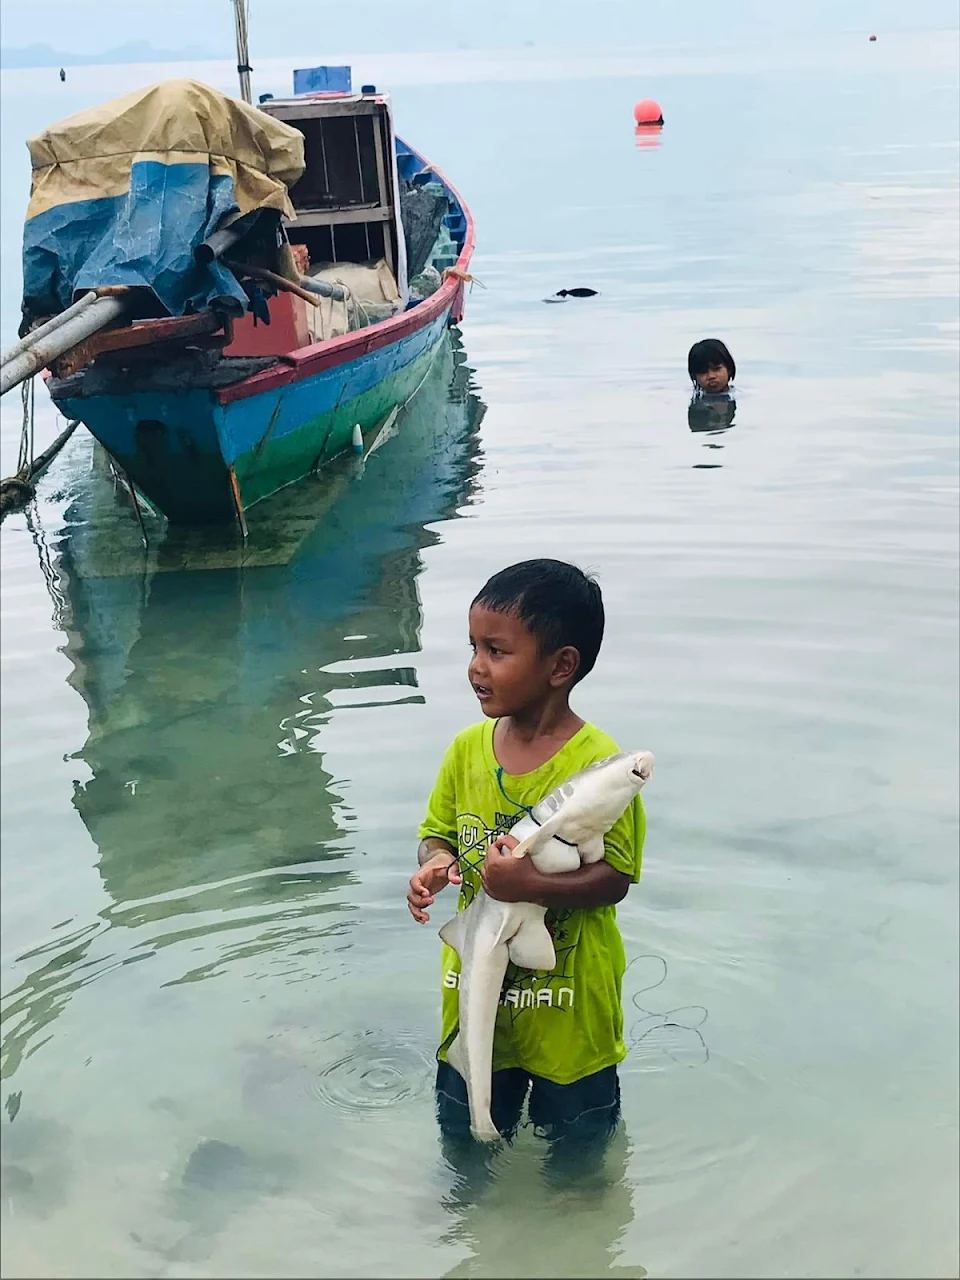 Kid playing with his alive shark pet on a leash on Koh Samui Thailand